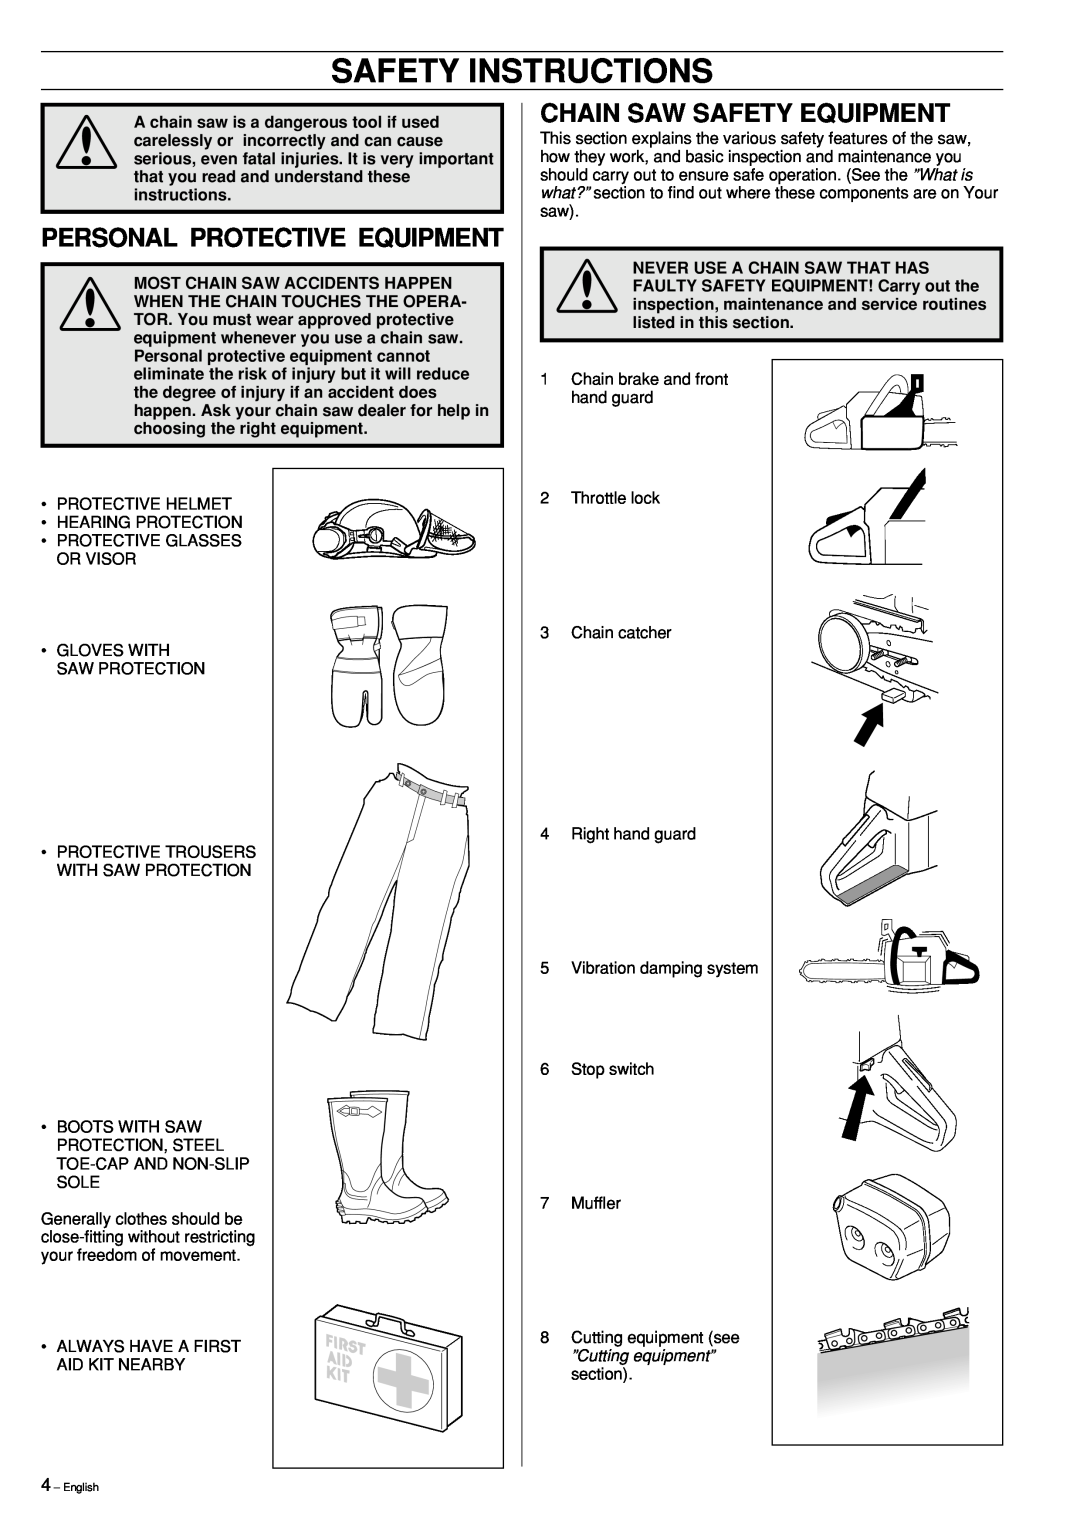 Jonsered CS 2186 manual Safety Instructions, Personal Protective Equipment, Chain Saw Safety Equipment 